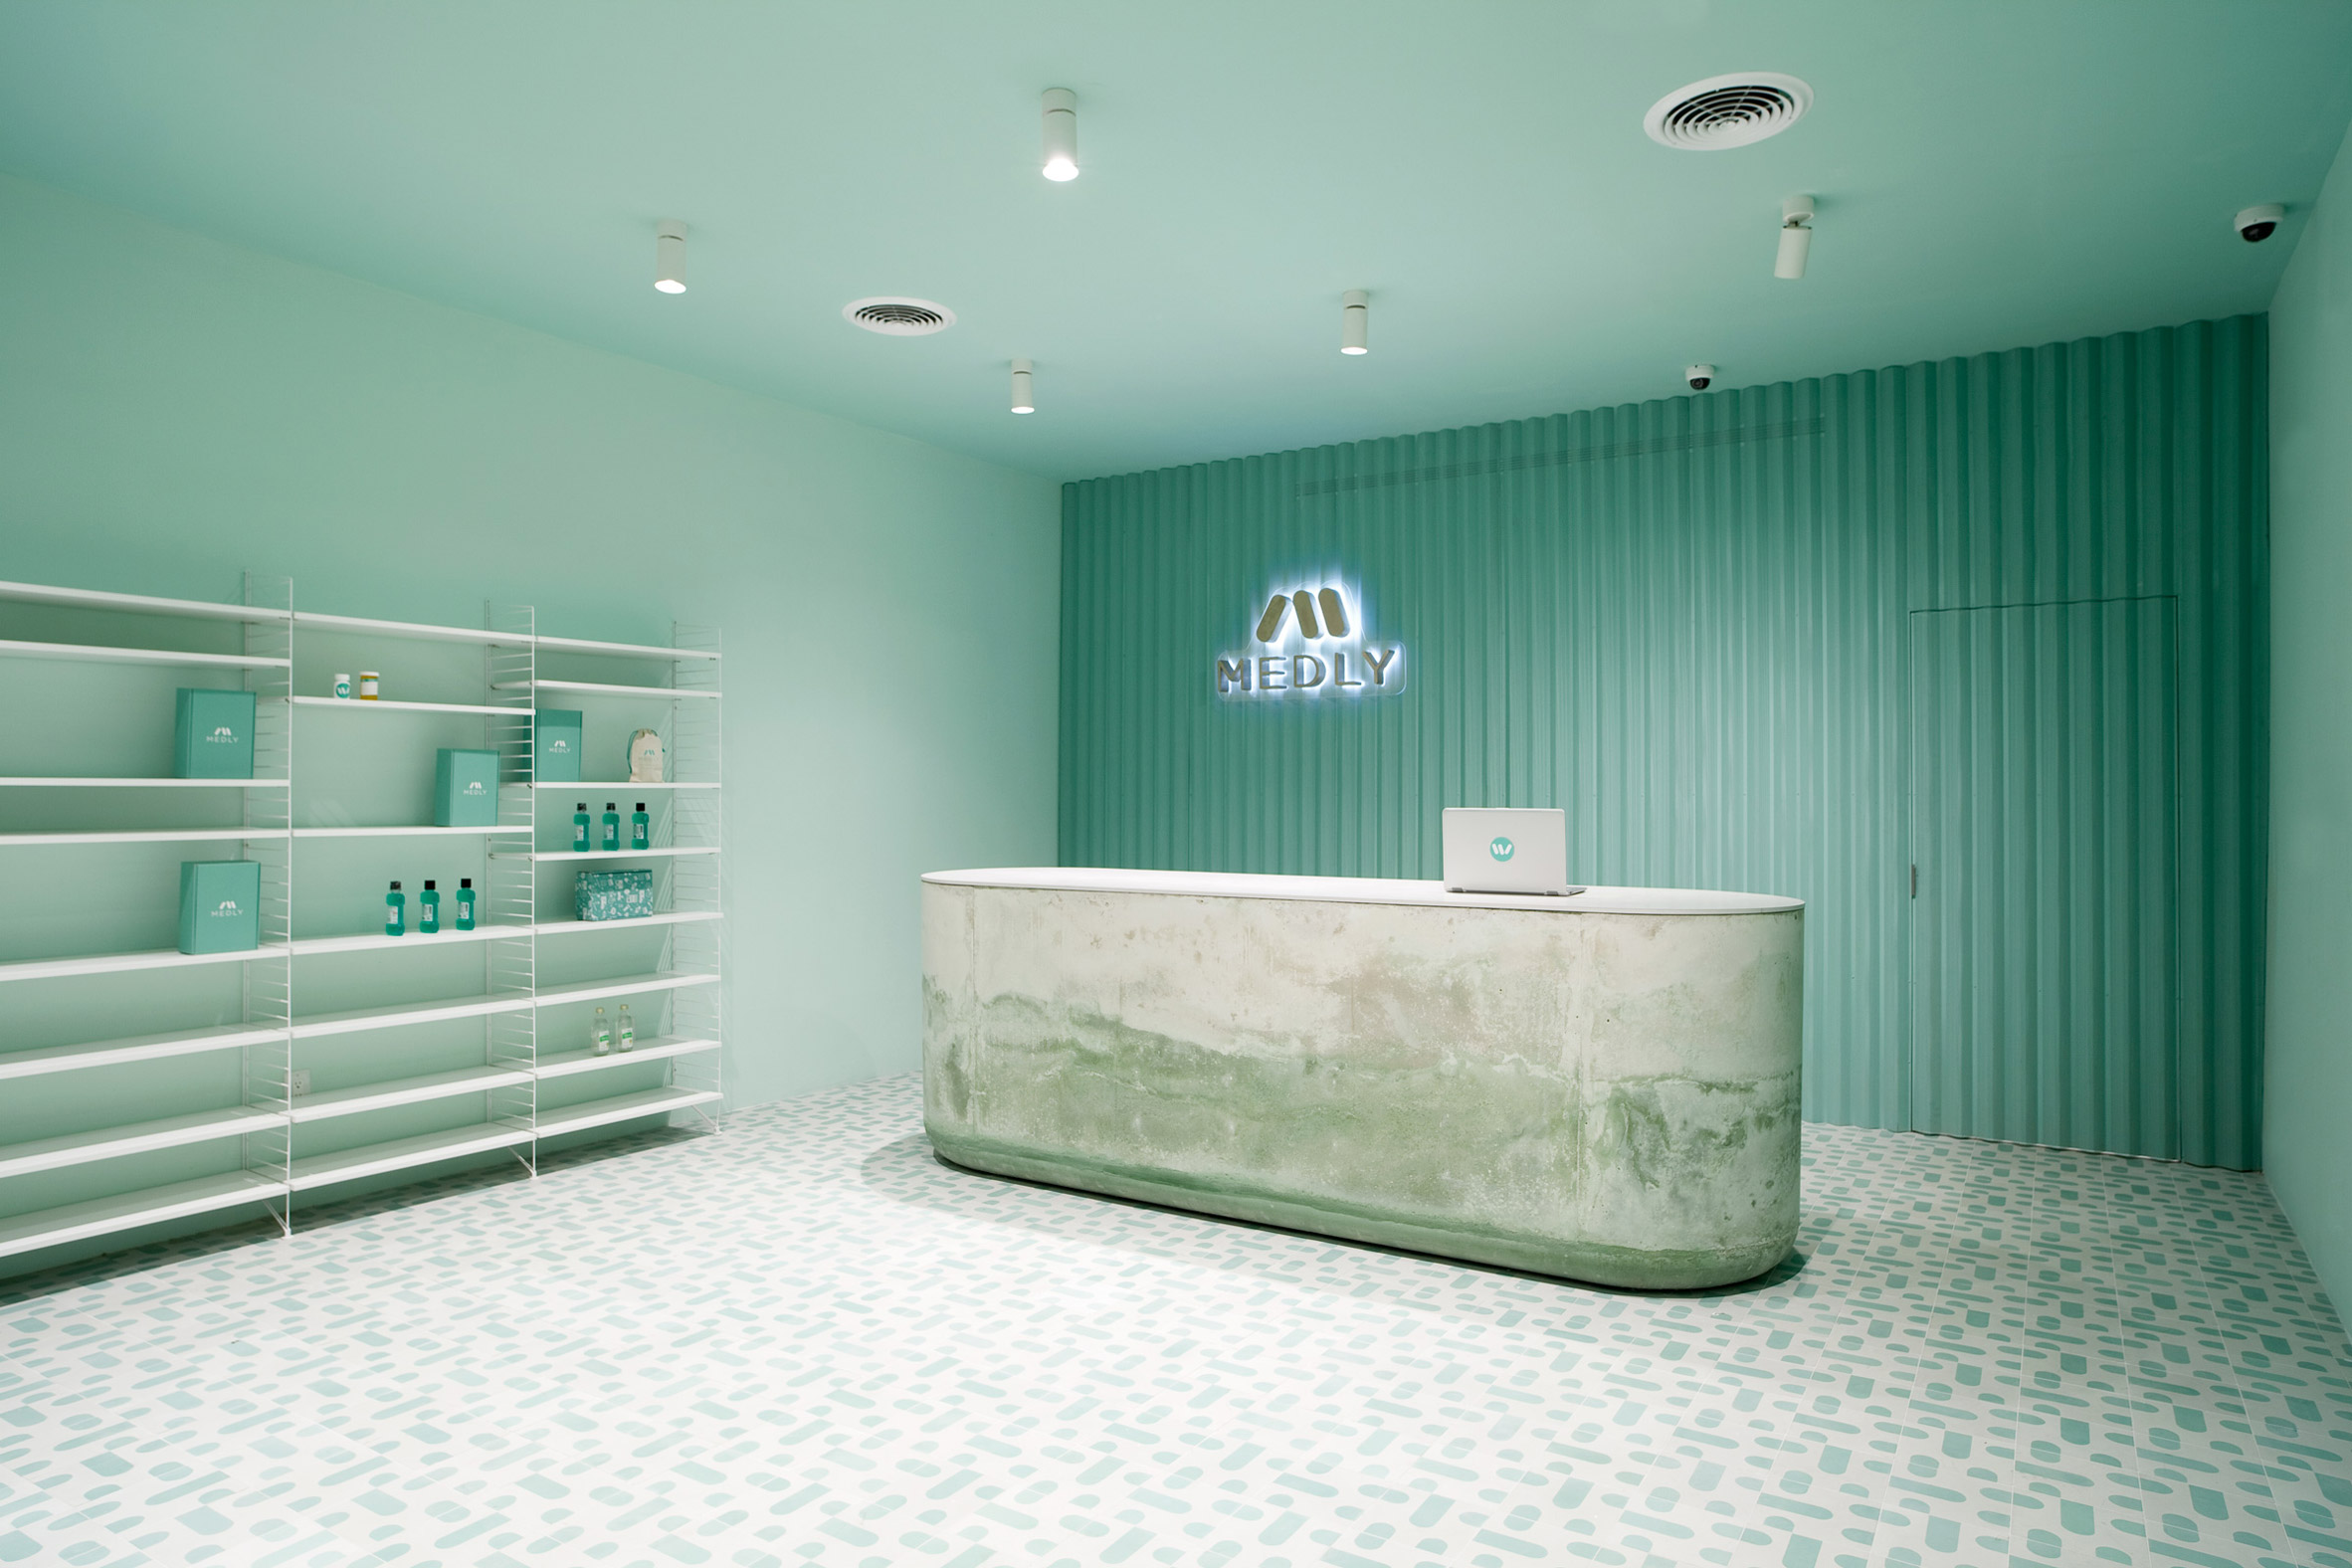 Pharmacy waiting room in Brooklyn features calming turquoise tones